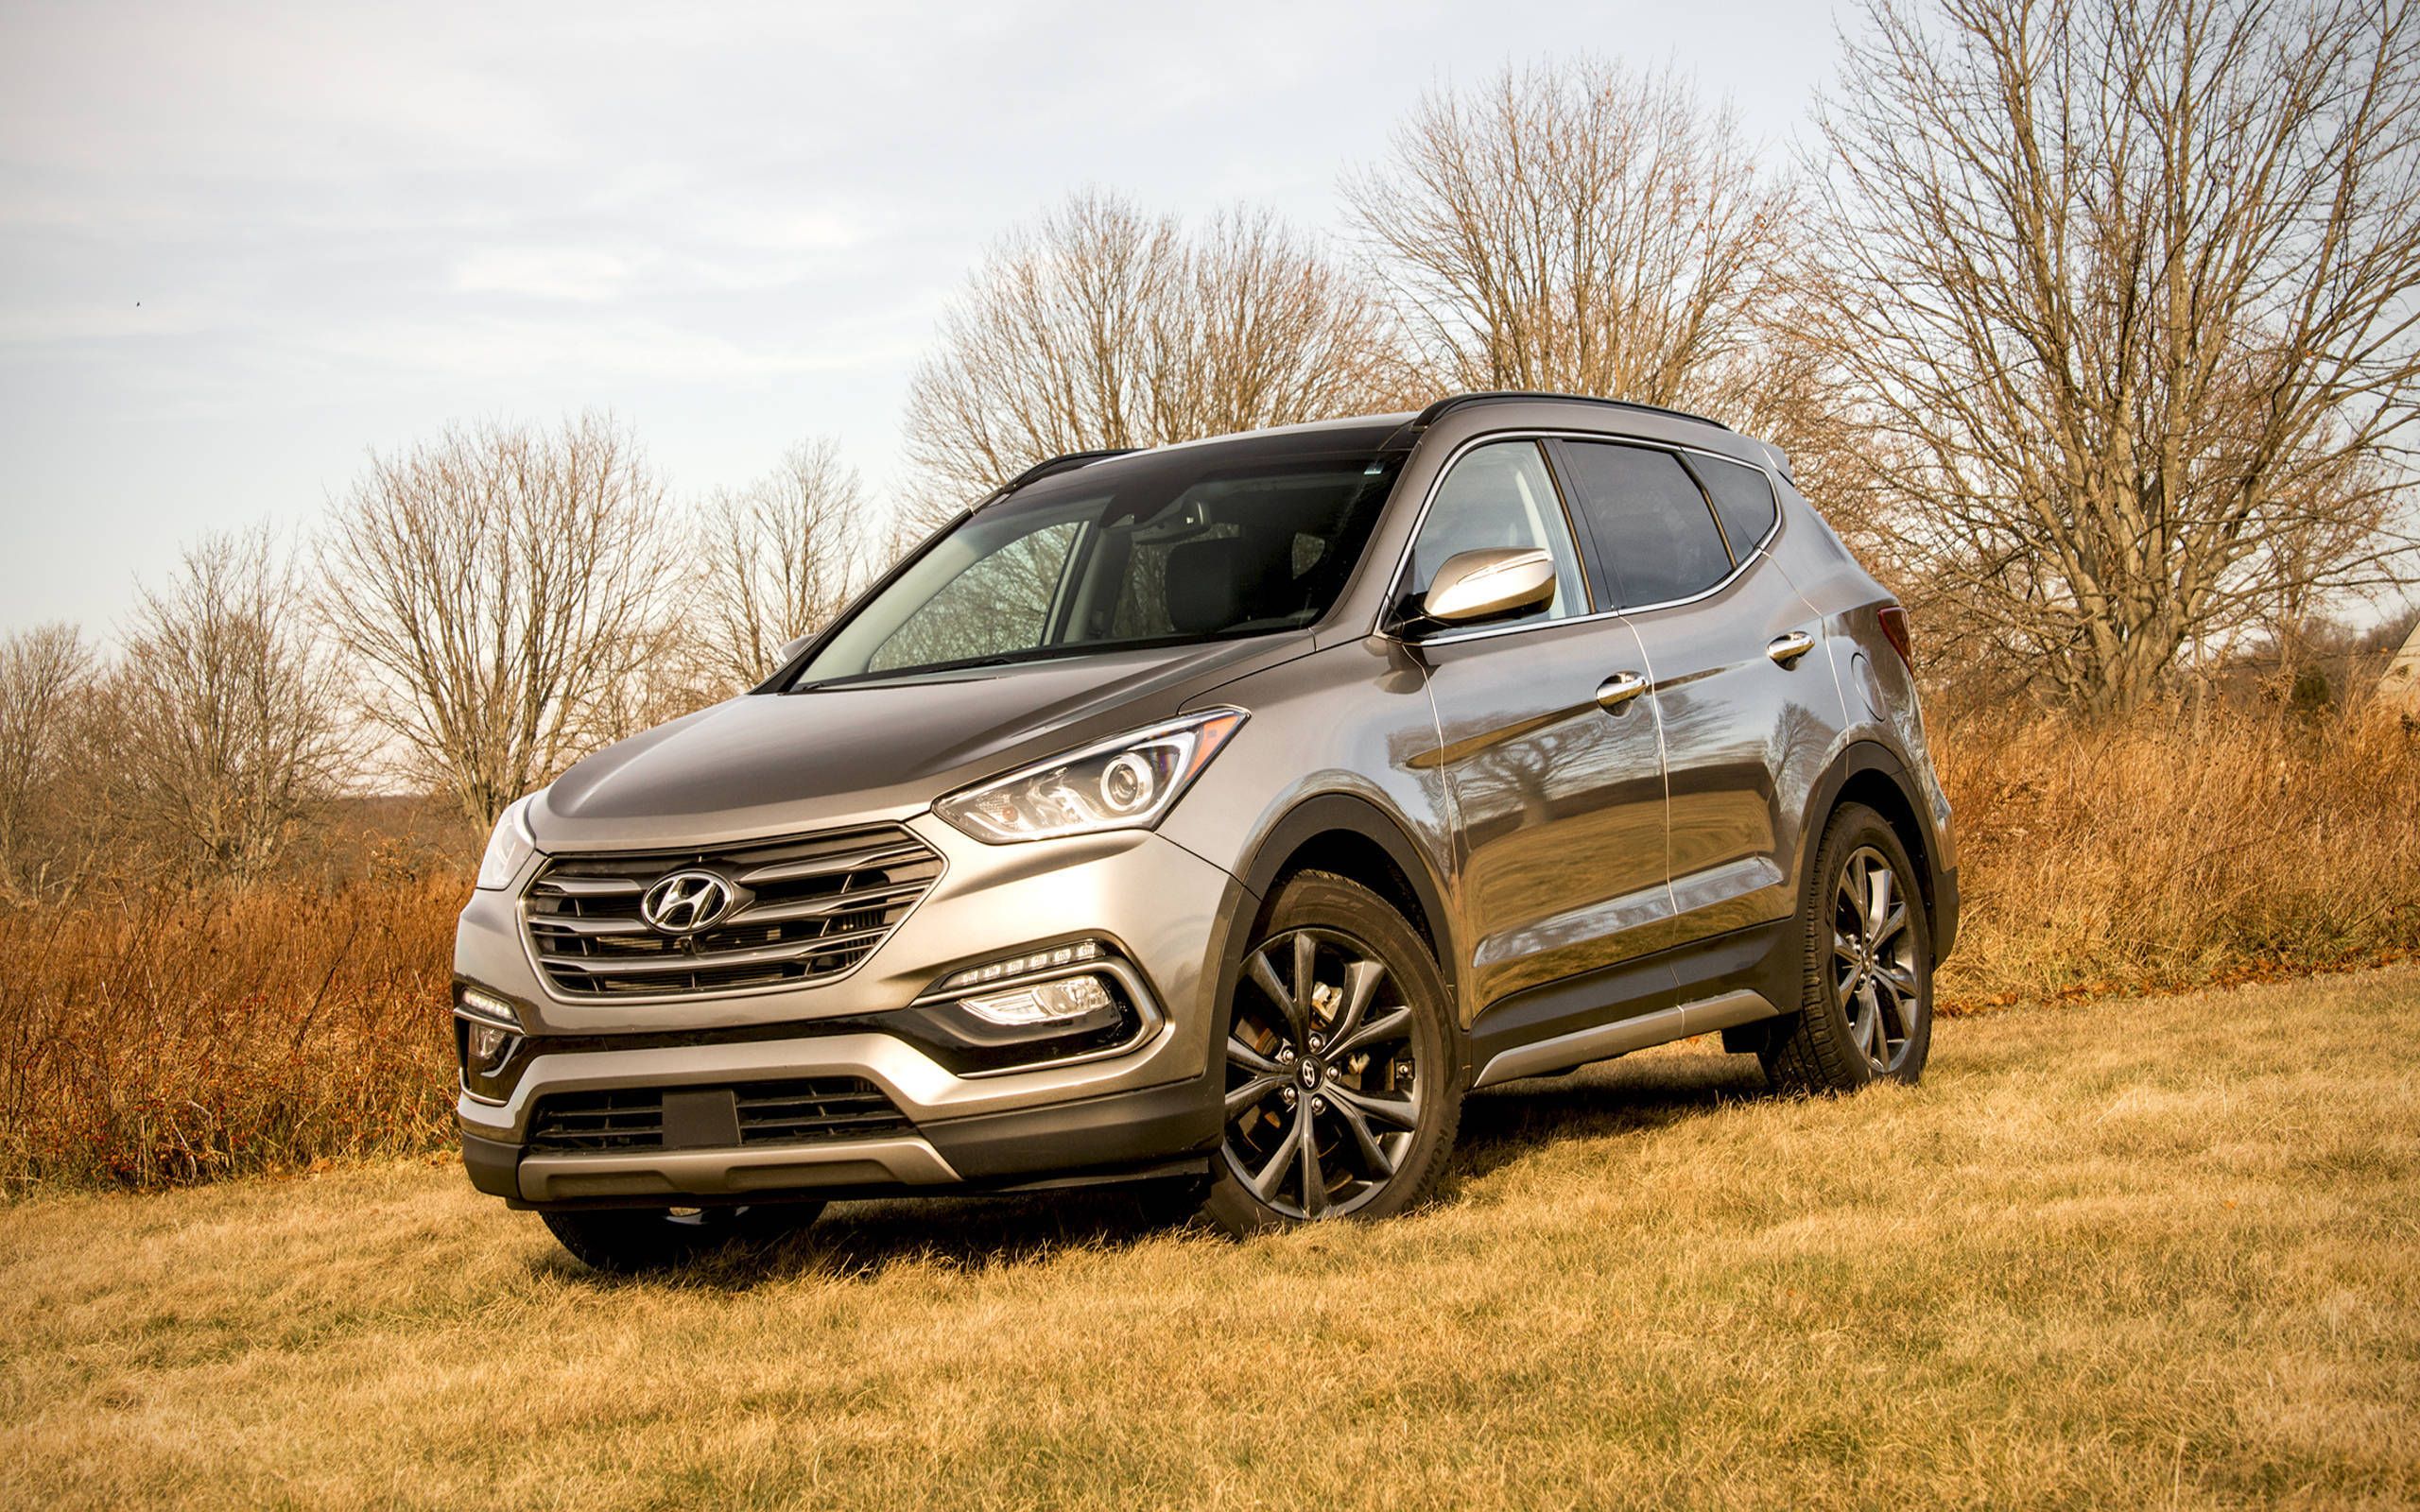 2017 Hyundai Santa Fe Sport review: Nice moves, but it gets expensive